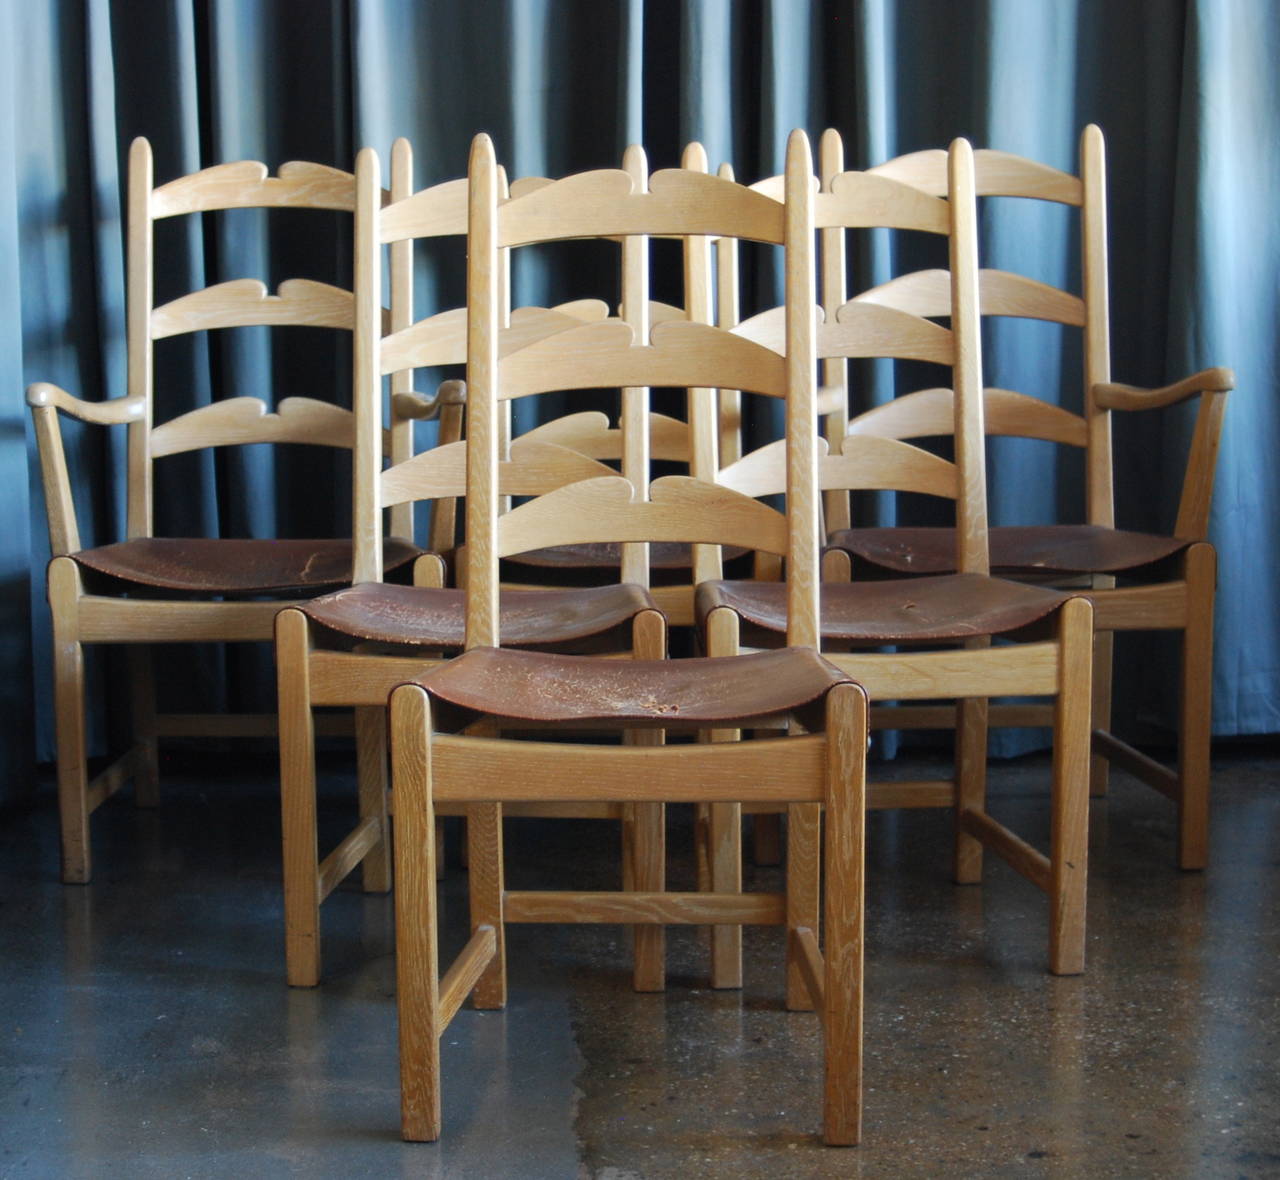 Scandinavian Modern Set of 6 Dining Chairs in Cerused Oak by Axel Einar Hjorth, circa 1940 For Sale